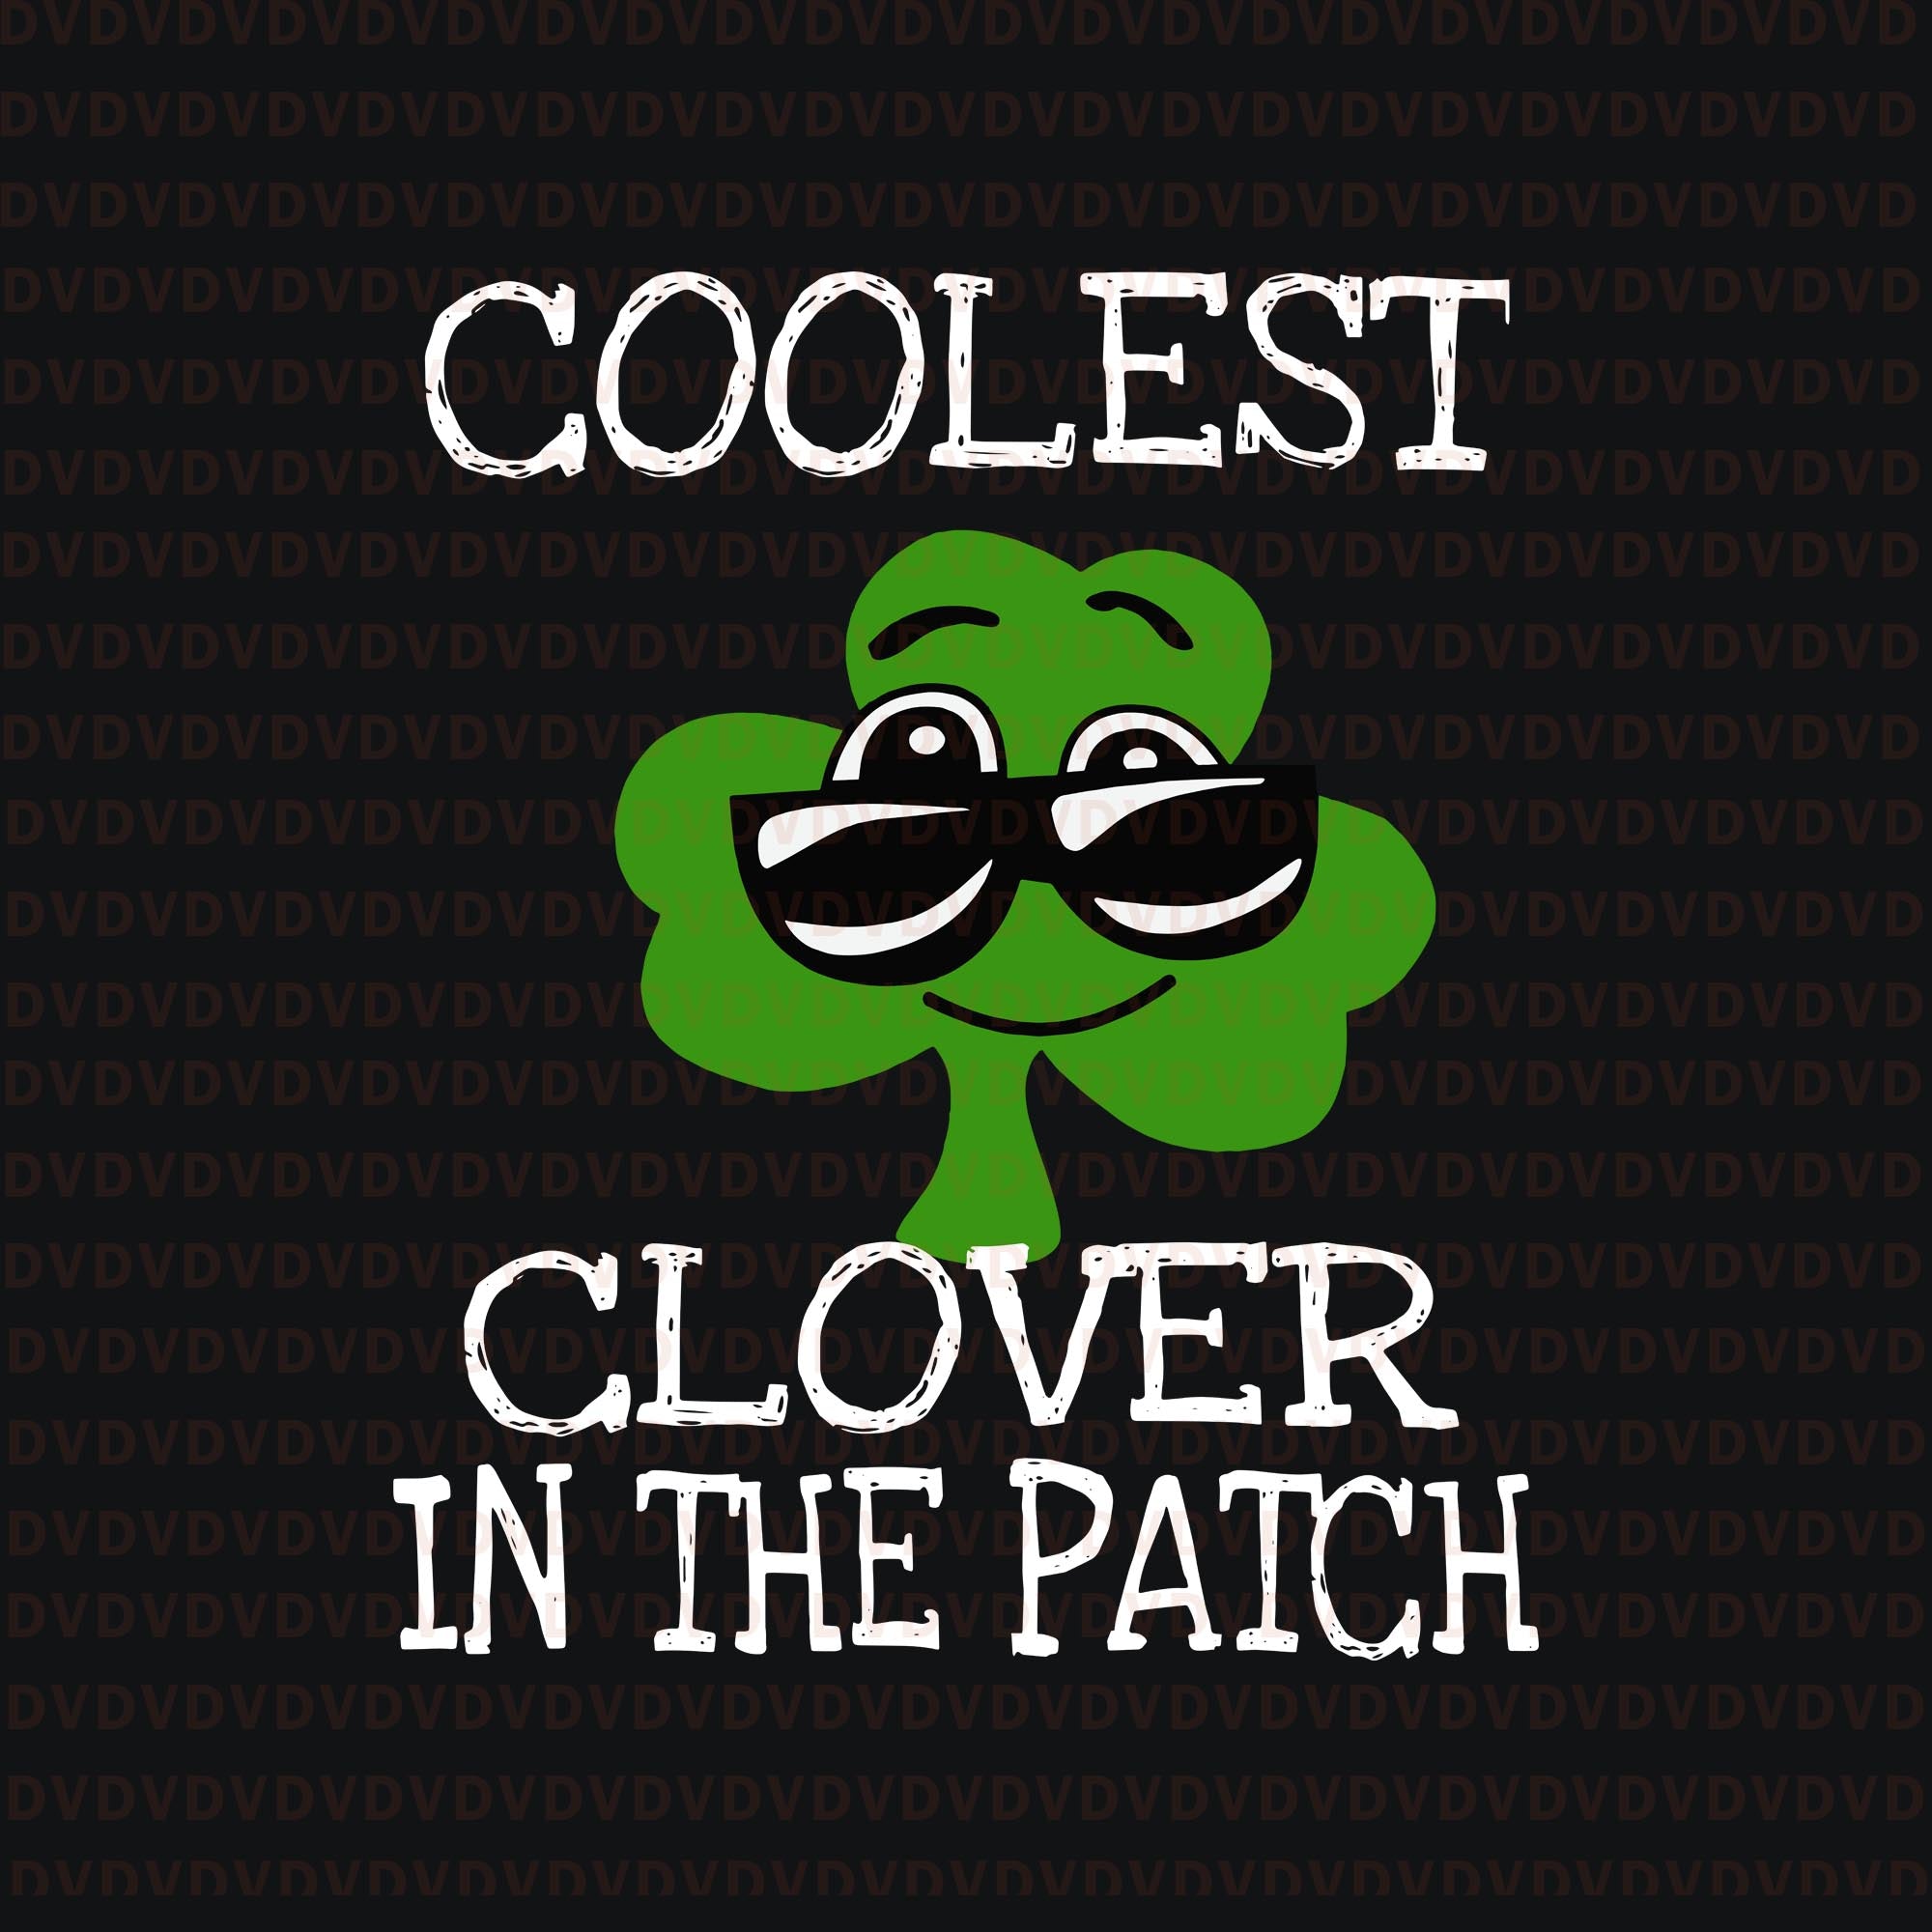 Coolest clover in the patch st patricks day svg, coolest clover in the patch st patricks day , coolest clover in the patch svg, coolest clover in the patch, st patrick day